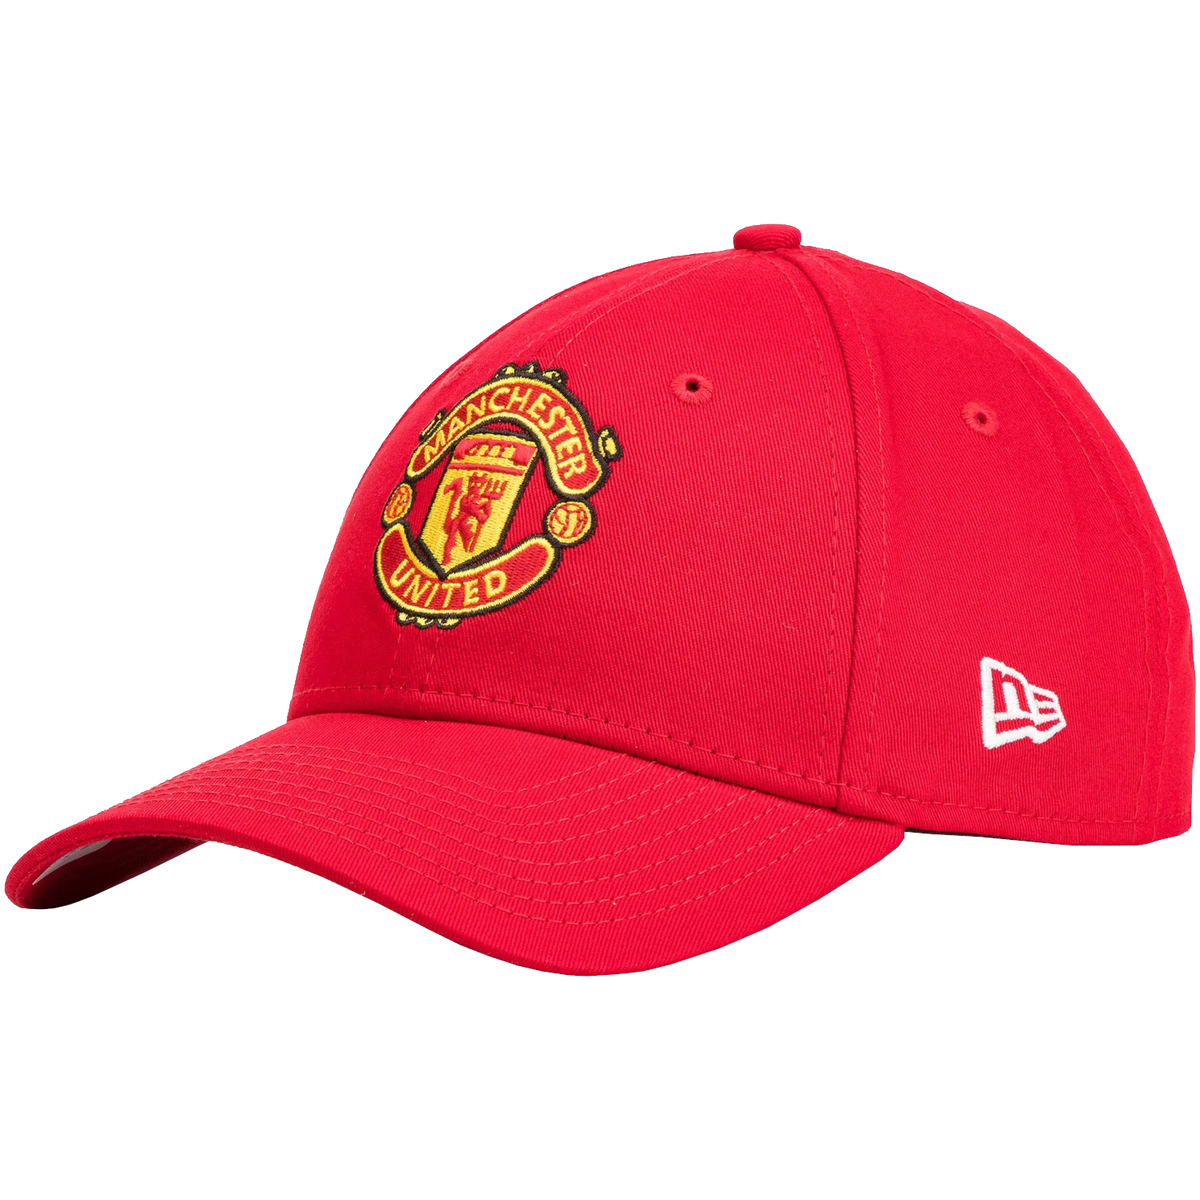 Accessoires Heren Pet New-Era 9FORTY Manchester United FC Cap Rood